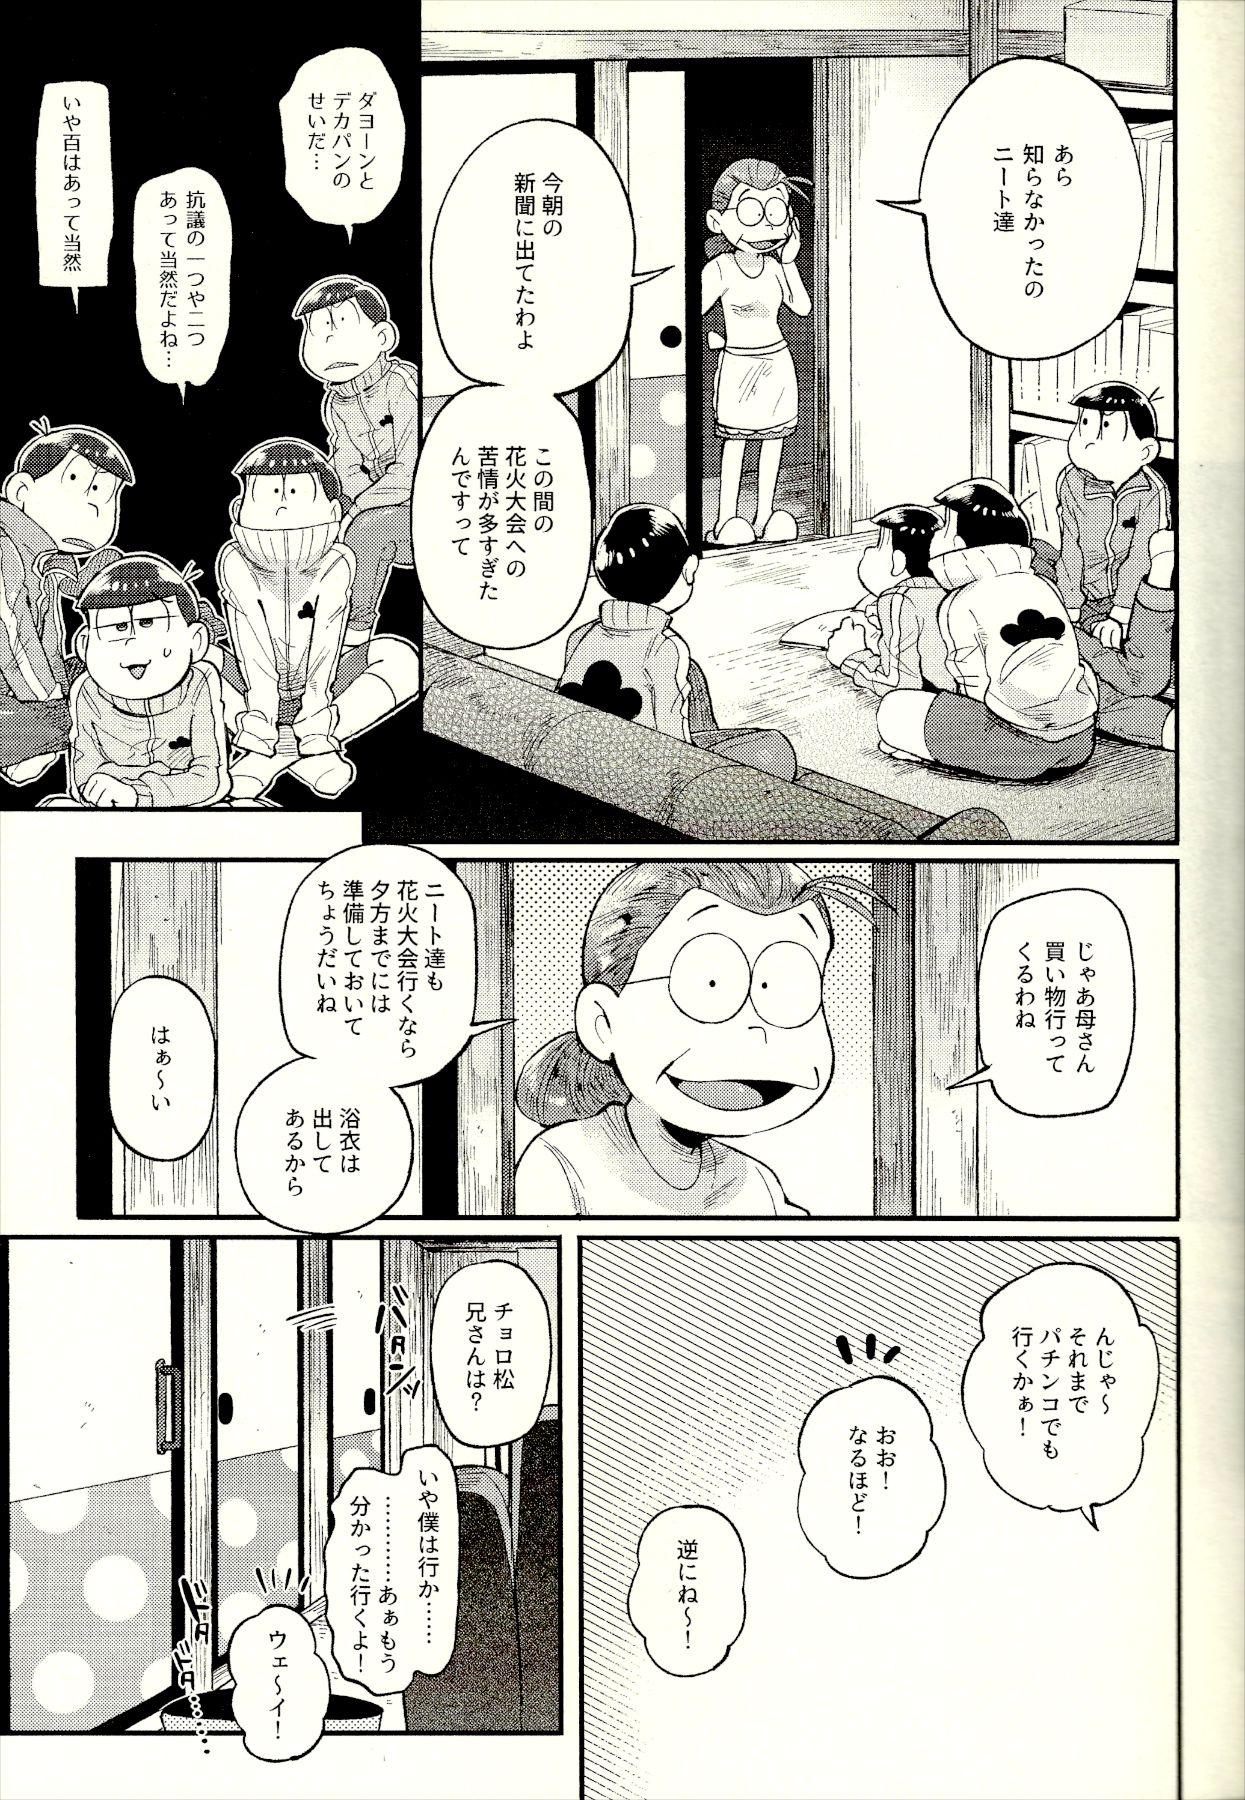 Monster Dick Season in the Summer - Osomatsu san Gayclips - Page 5